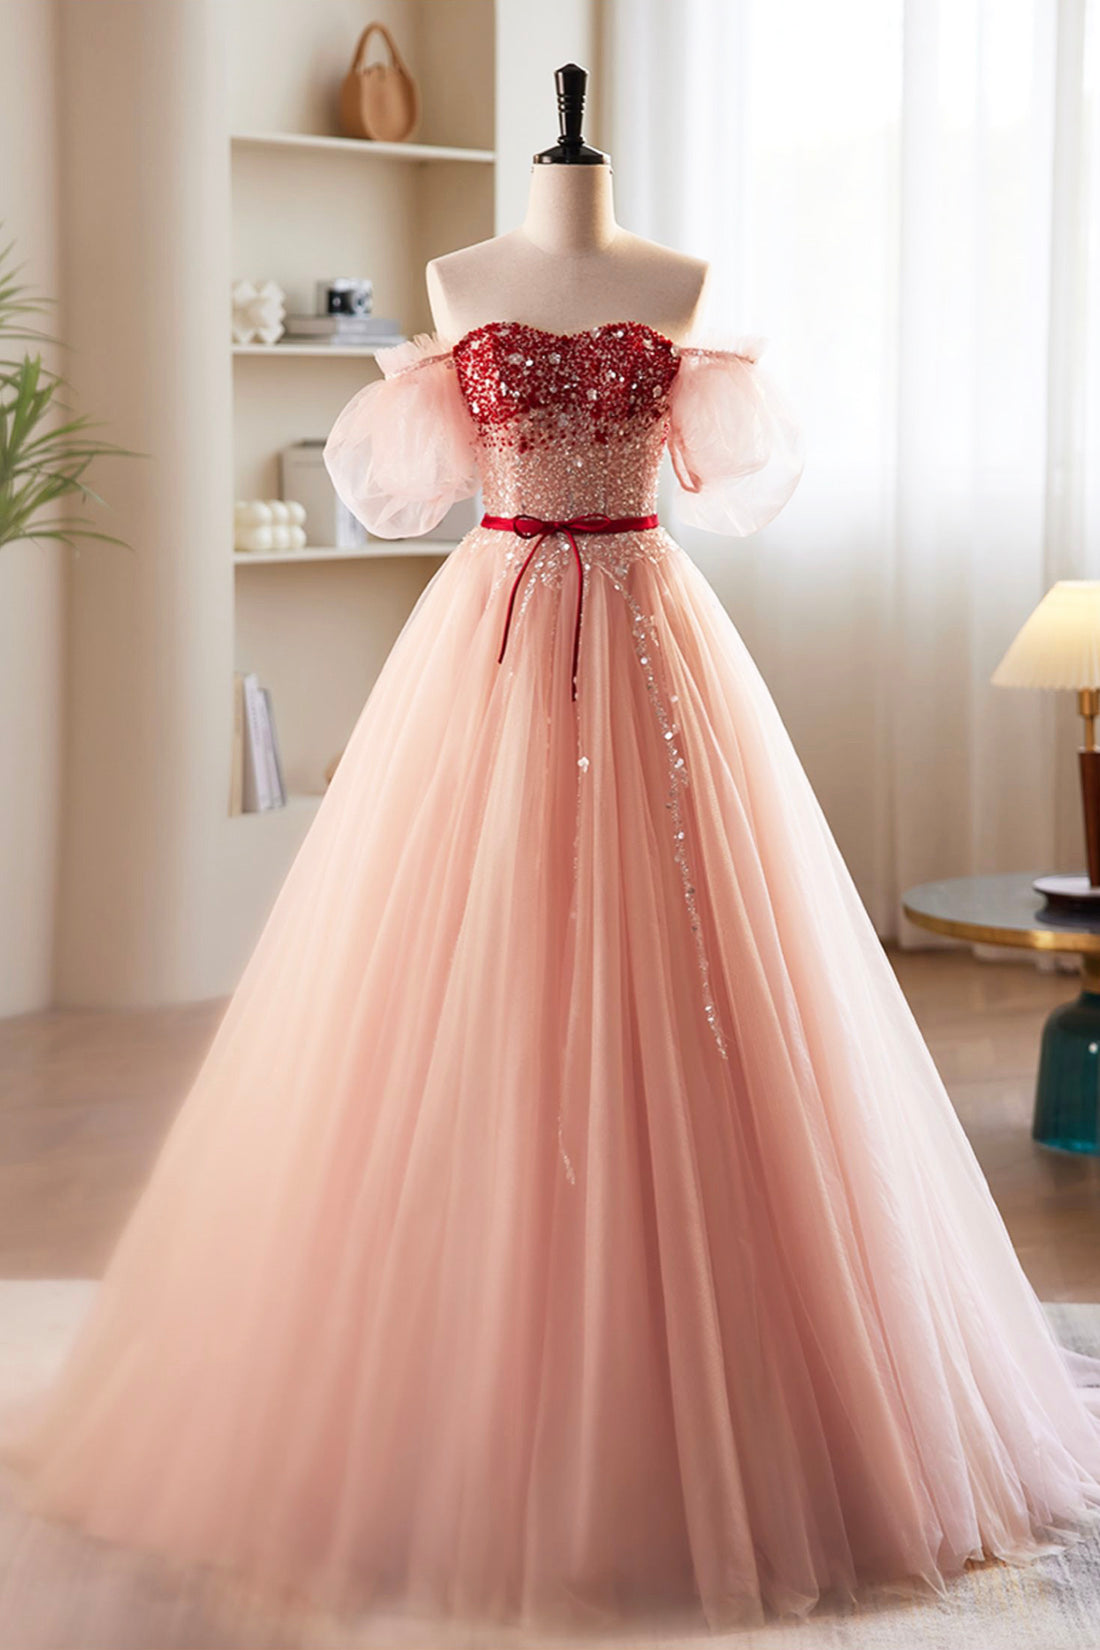 Fancy Beautiful Prom Dress Mint Green Girls Ball Gown Quinceanera Gown –  Siaoryne